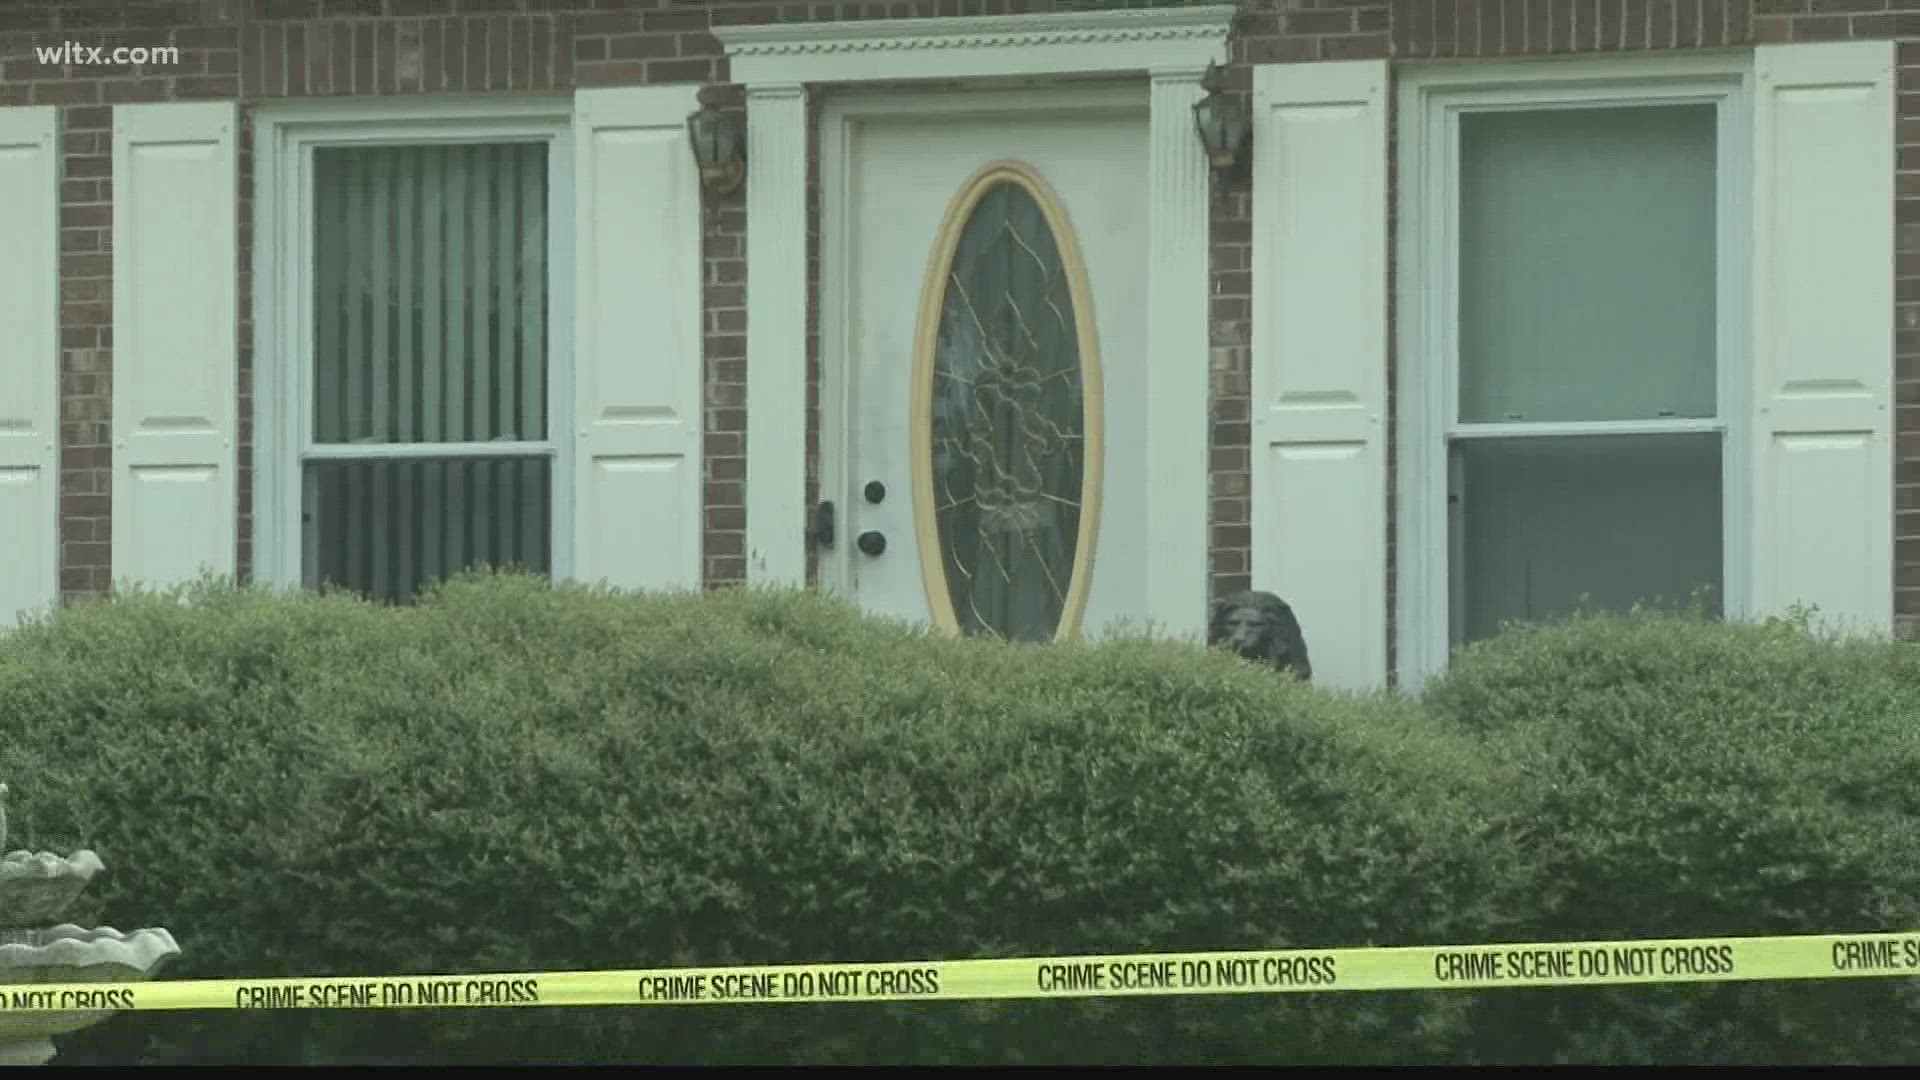 The Richland County Sheriff's Department is investigating after two people were found dead at a home on Greensprings Drive, off North Brickyard Road.